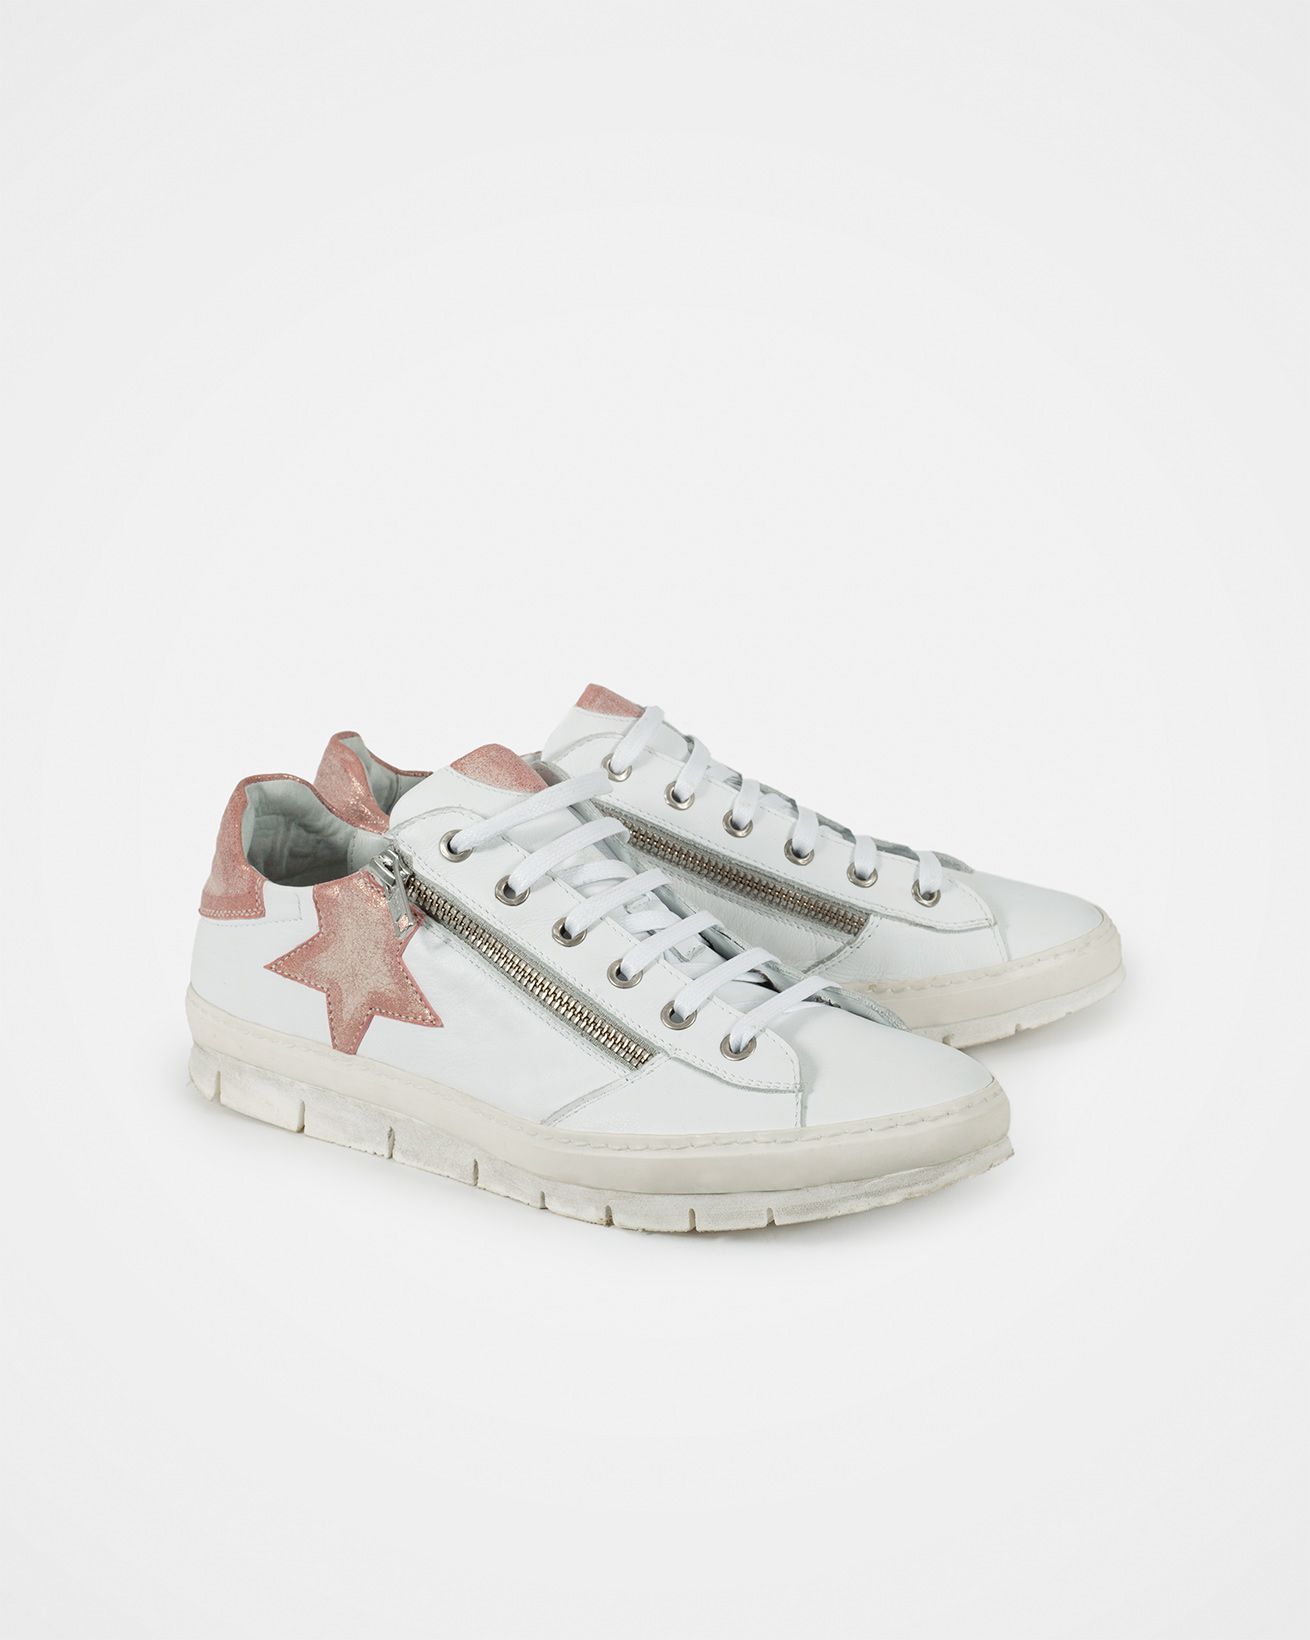 Embellished Trainers / White, Antique Rose / 37